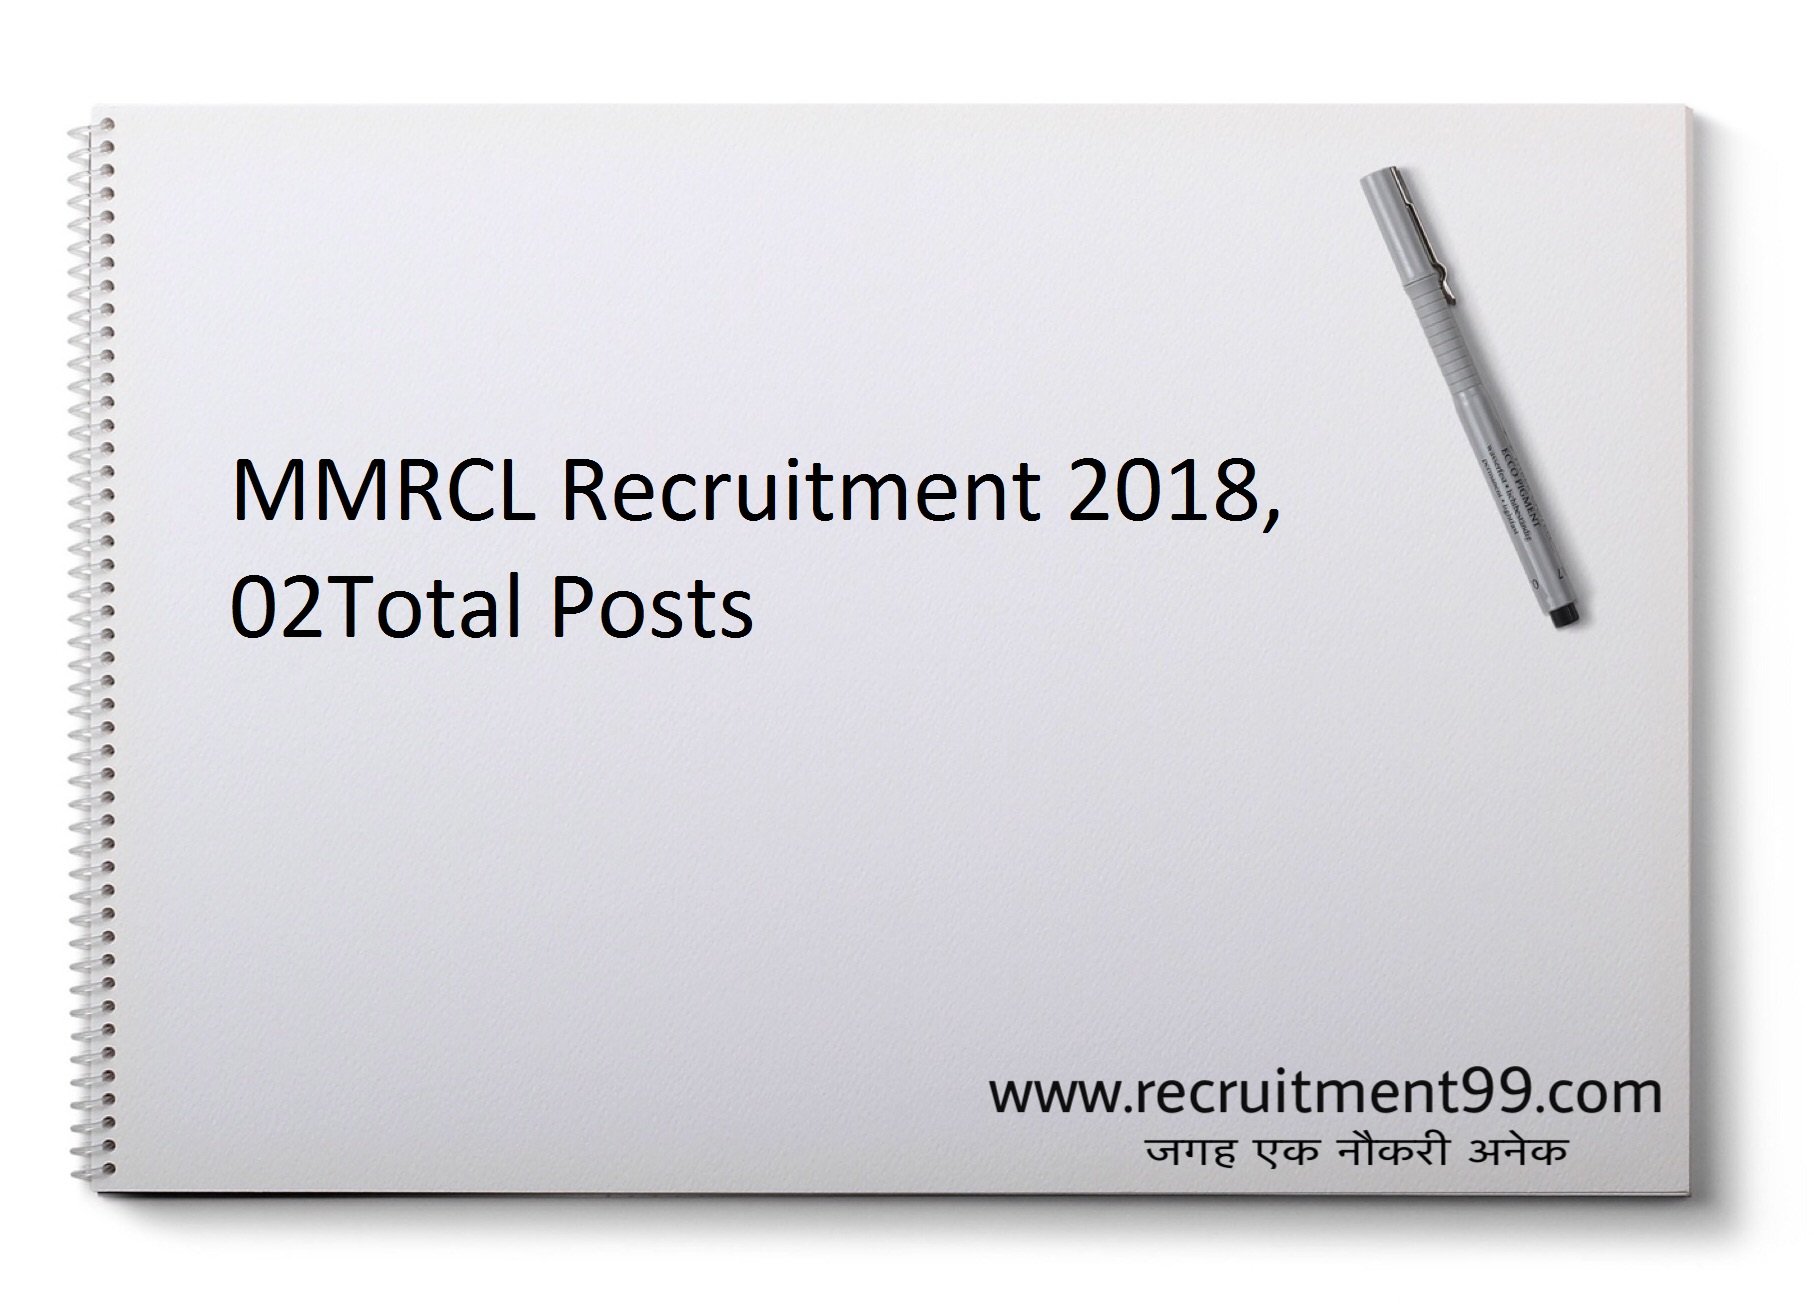 MMRCL General Manager Recruitment Admit Card Result 2018